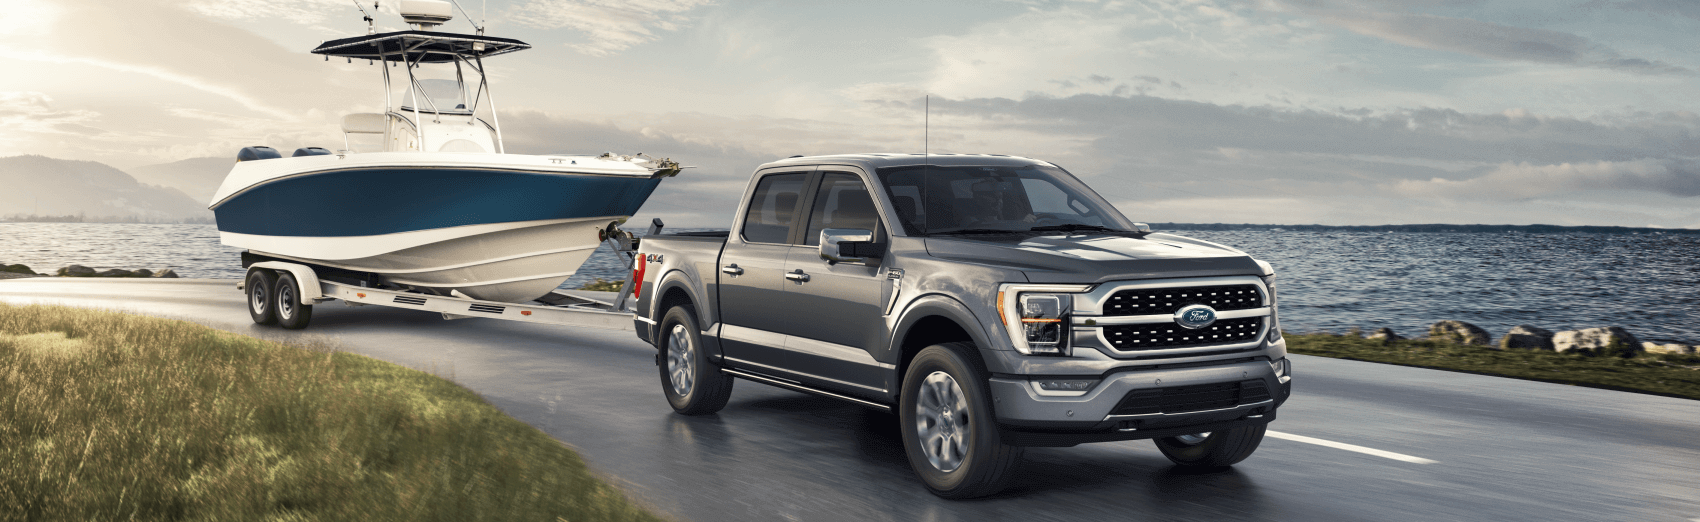 2021 Ford F-150 Silver Towing Boat